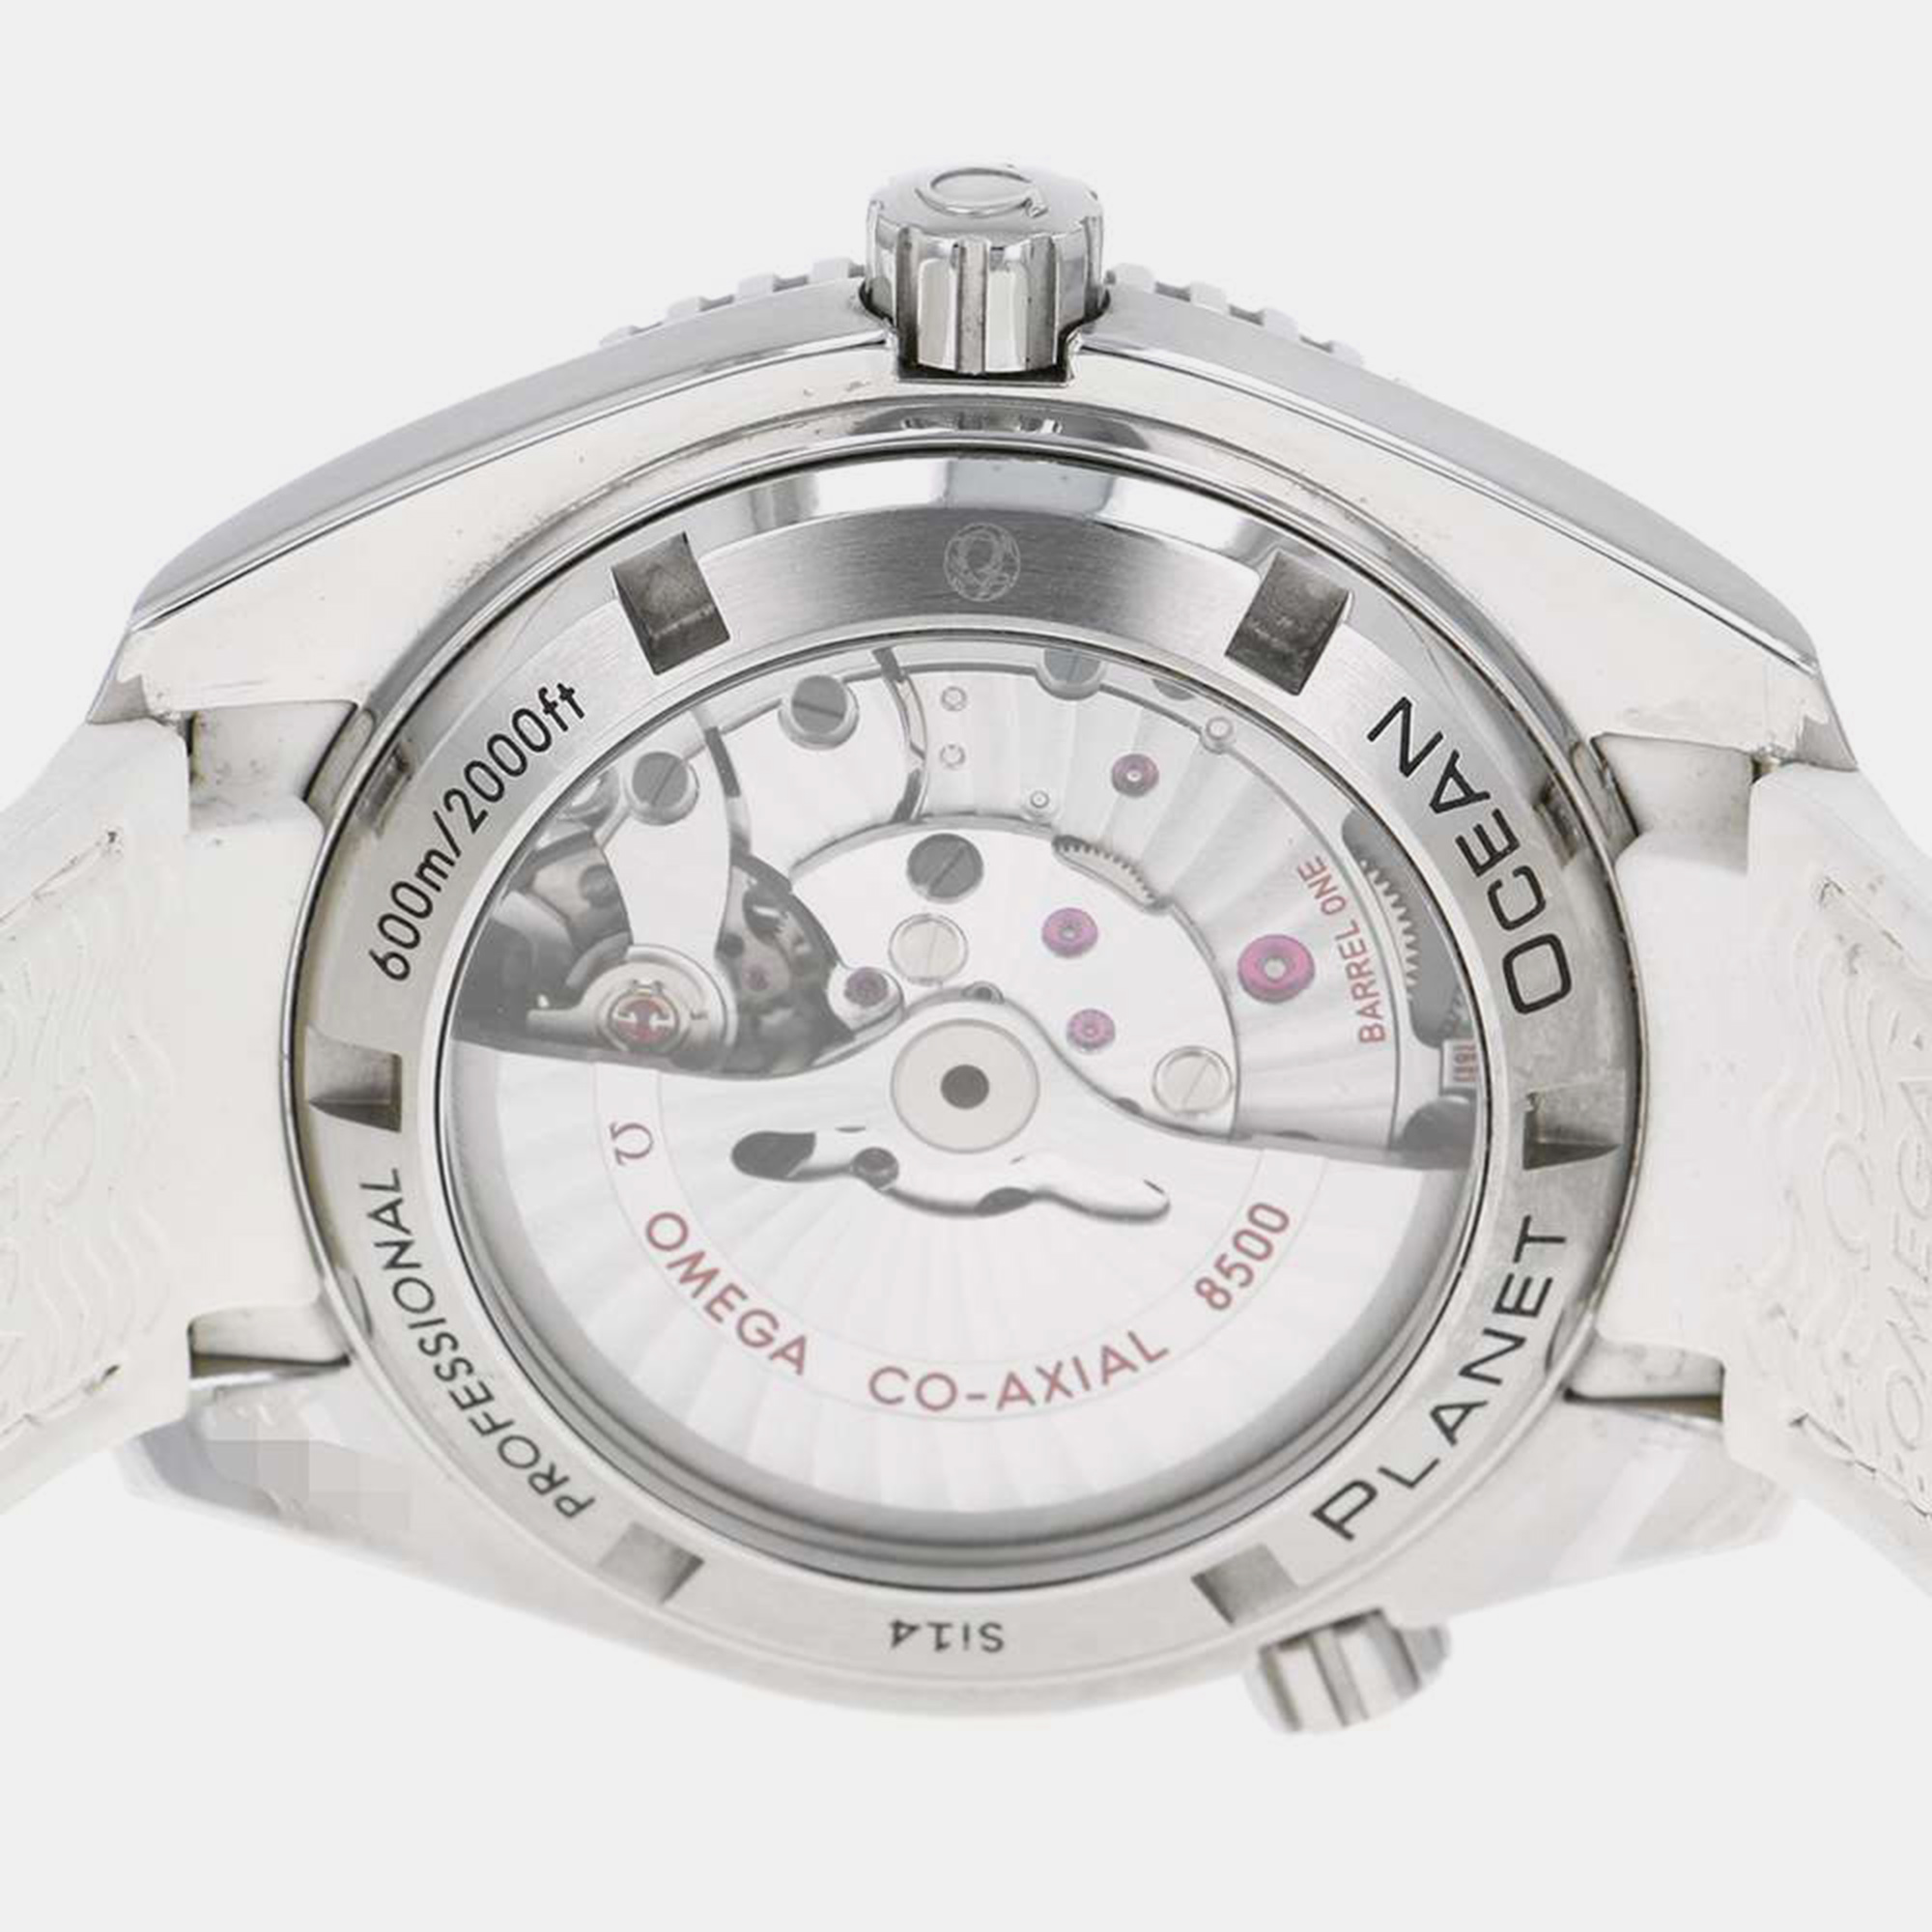 Omega White Stainless Steel Seamaster Planet Ocean 232.32.42.21.04.001 Automatic Men's Wristwatch 42 Mm